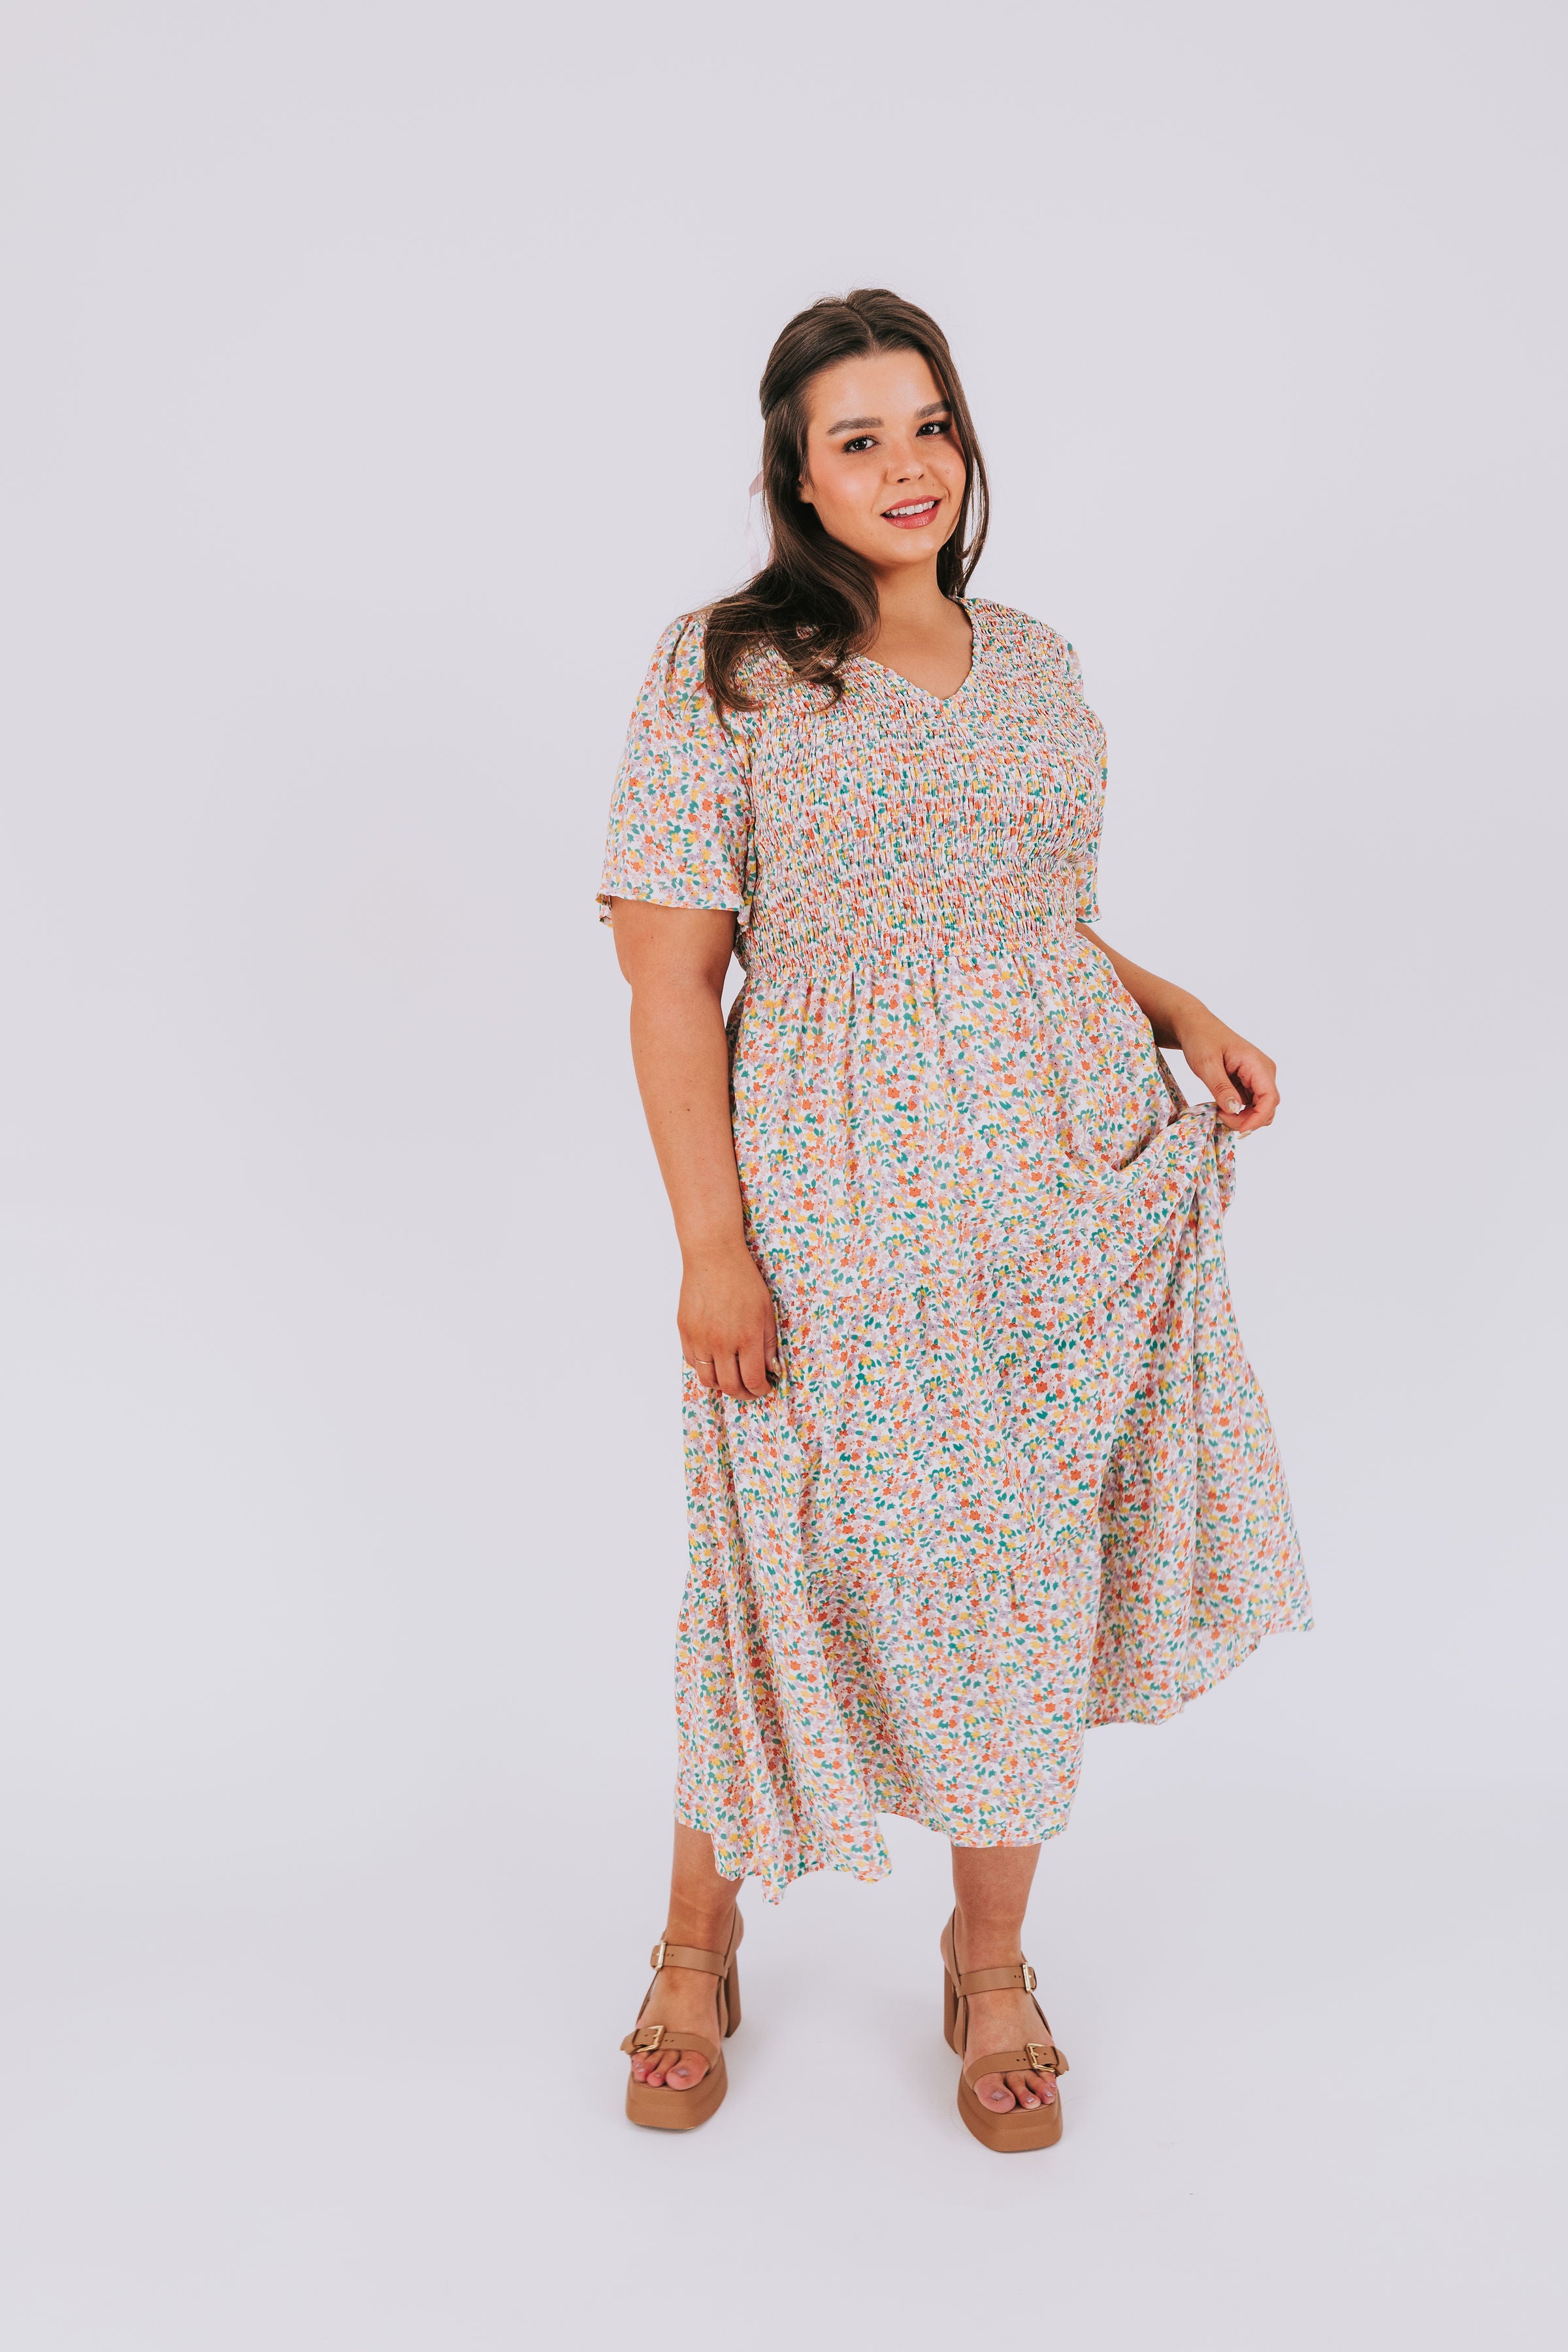 PLUS SIZE - Middle Of The Song Dress - 2 Colors!